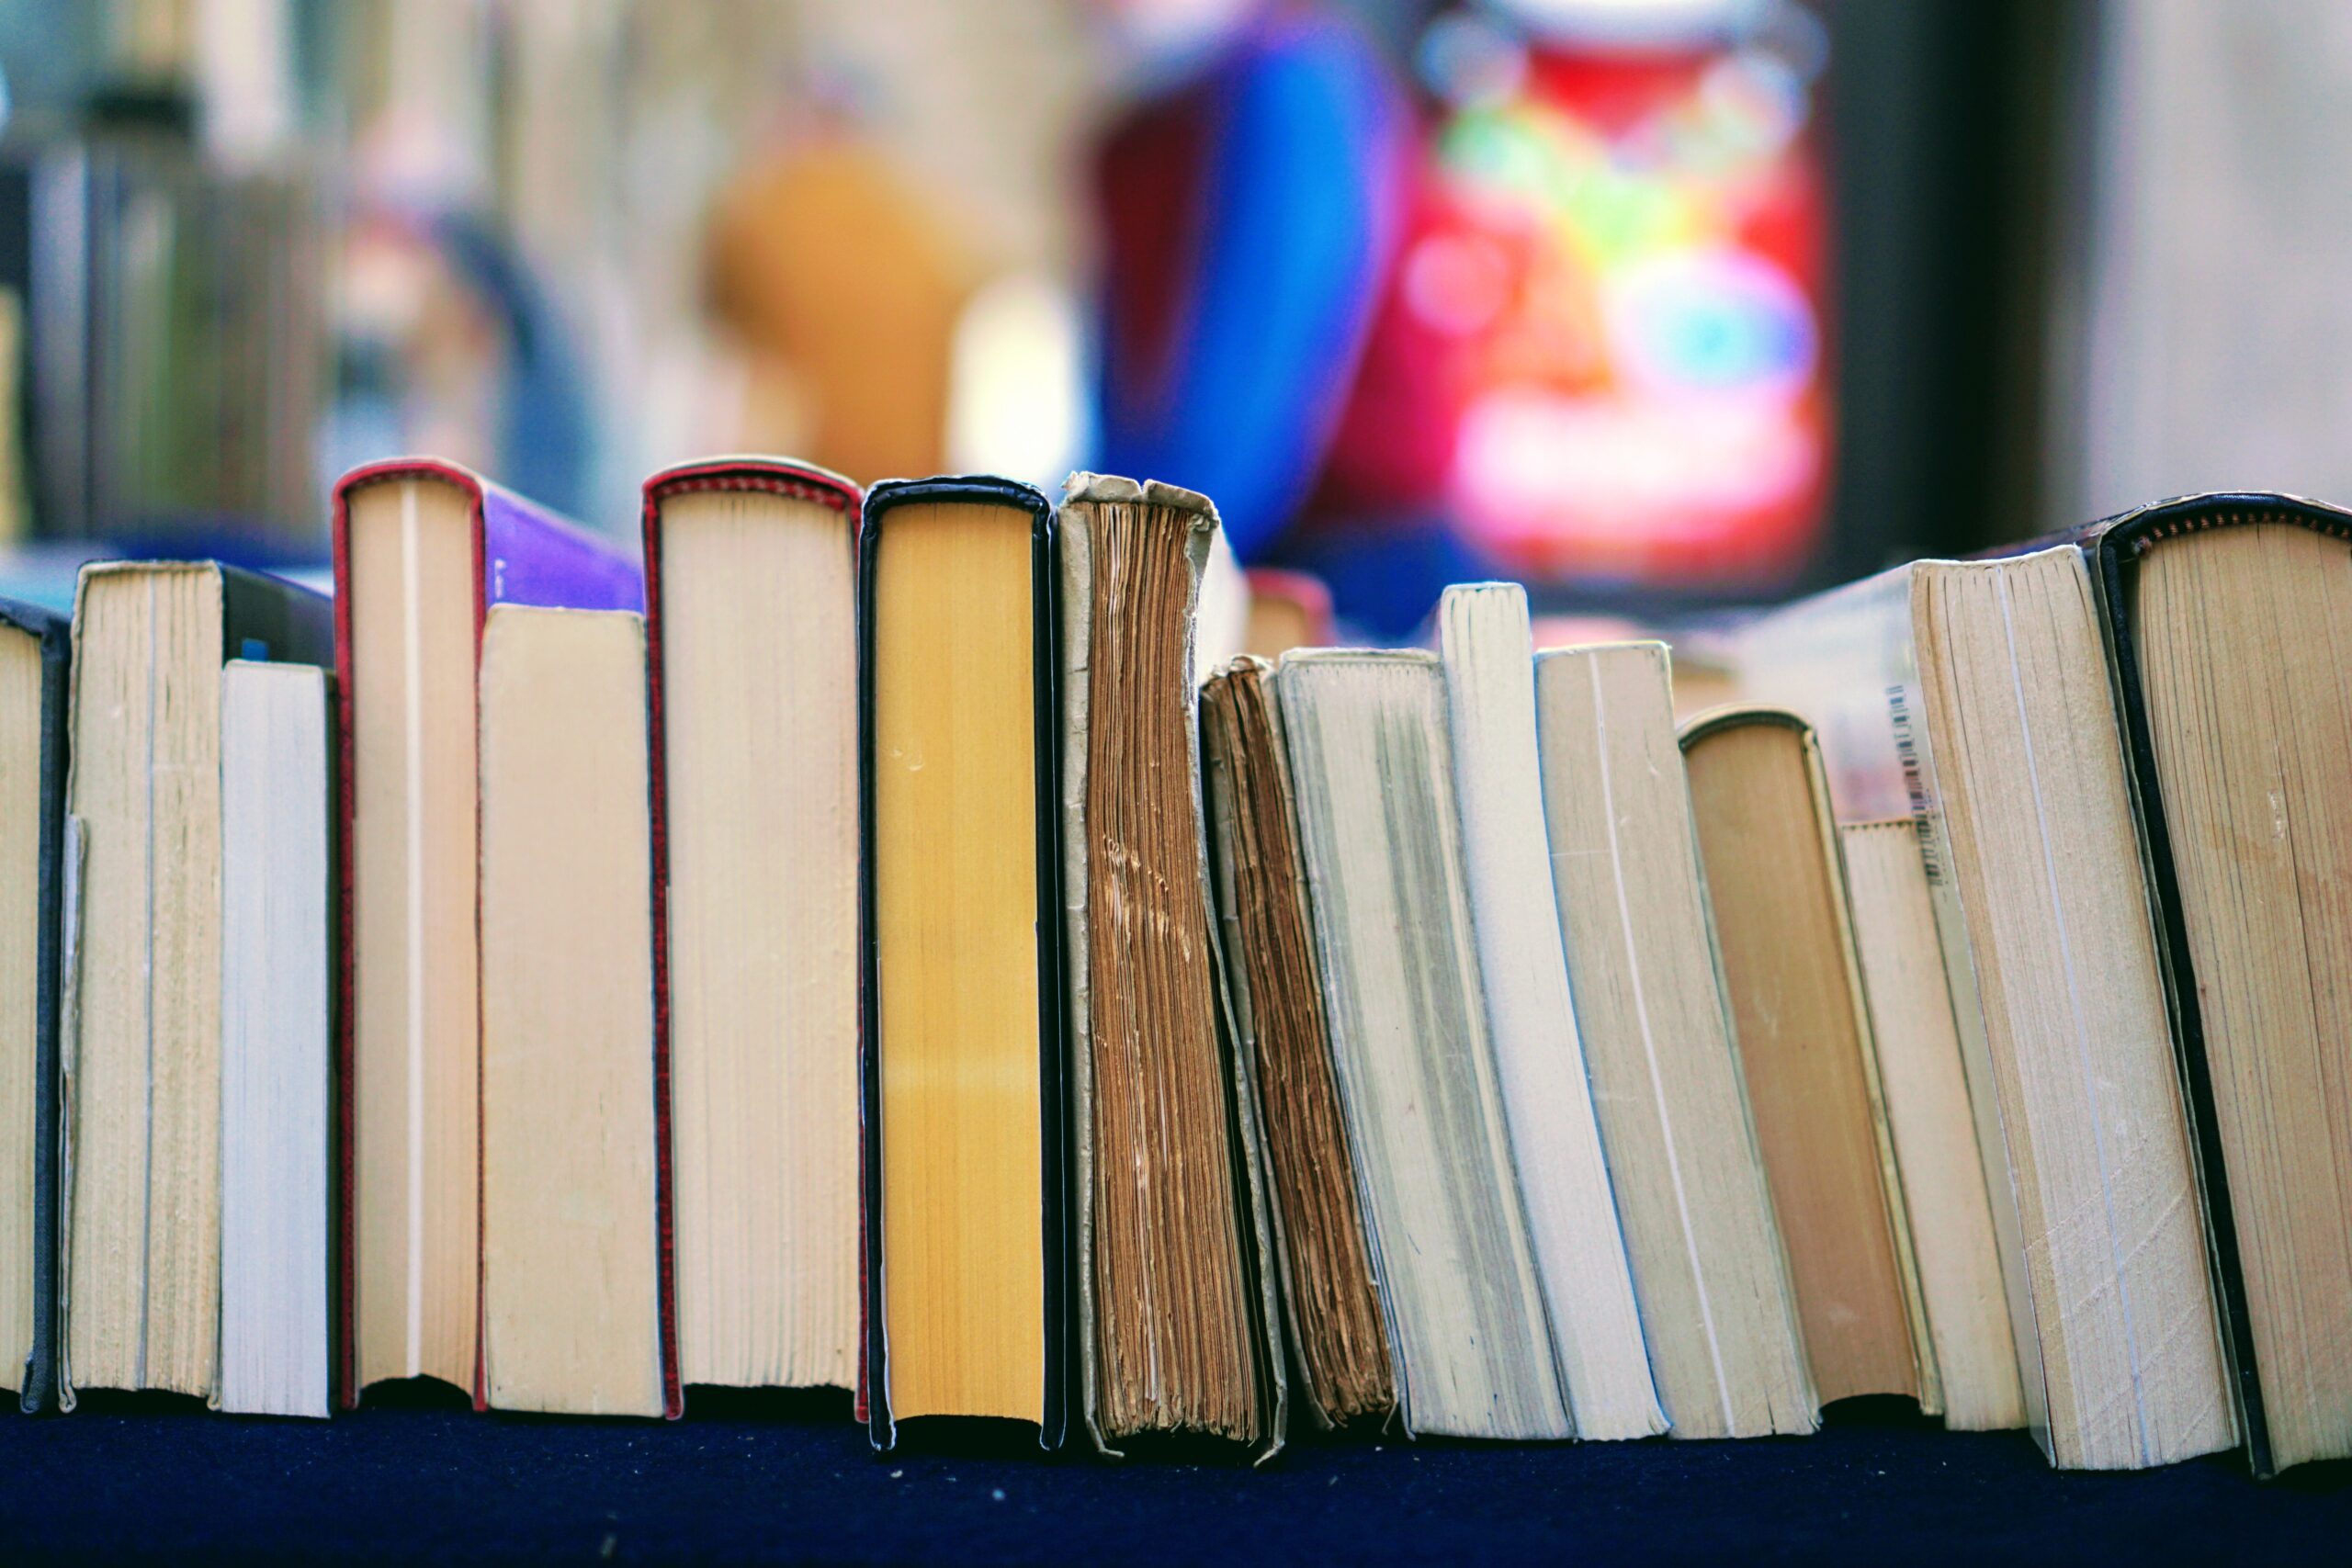 Cancer books: how reading helps during cancer